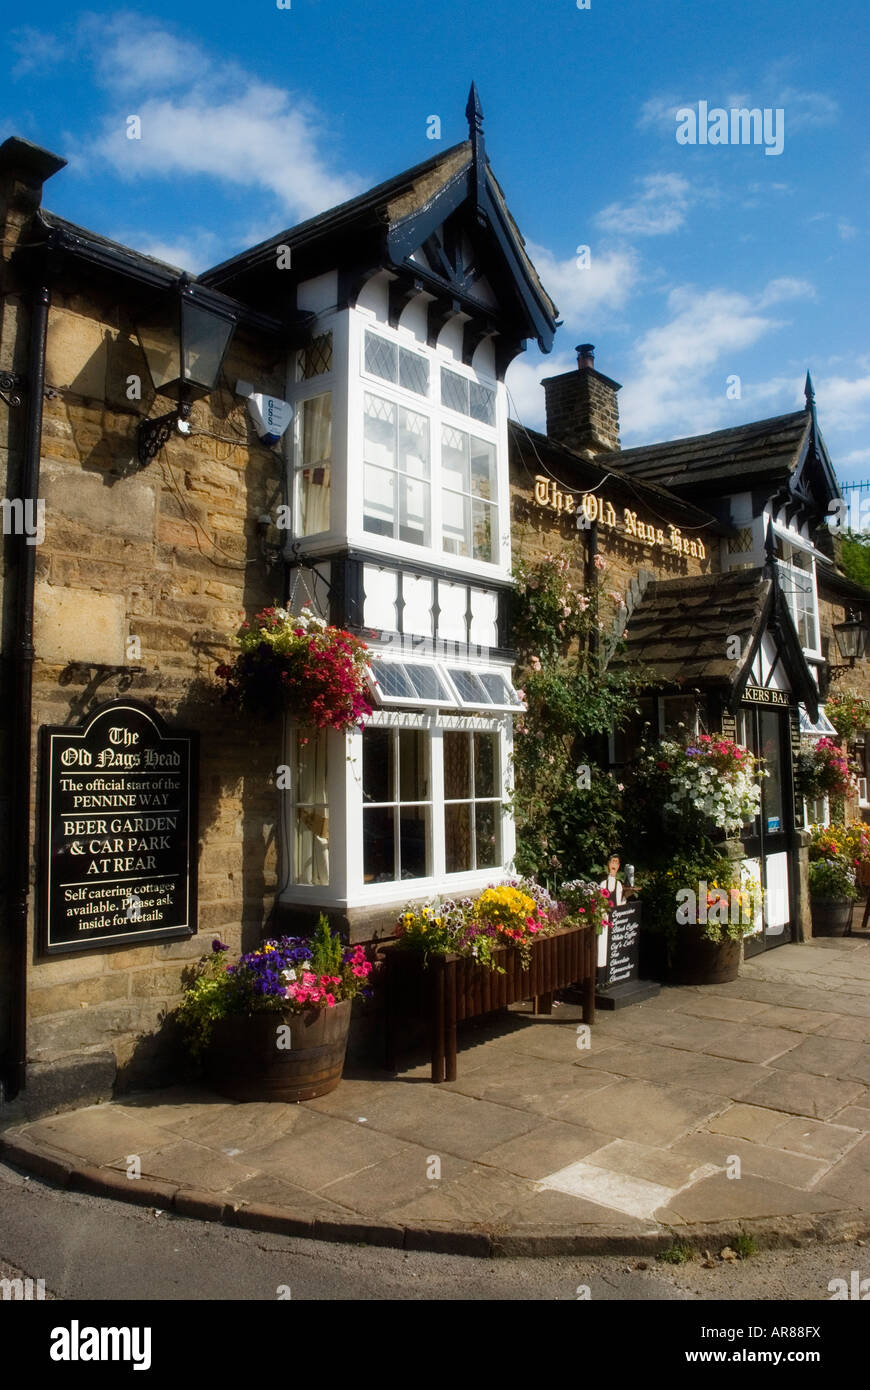 The Nags Head pub Edale the official start of the Penine Way footpath Stock Photo